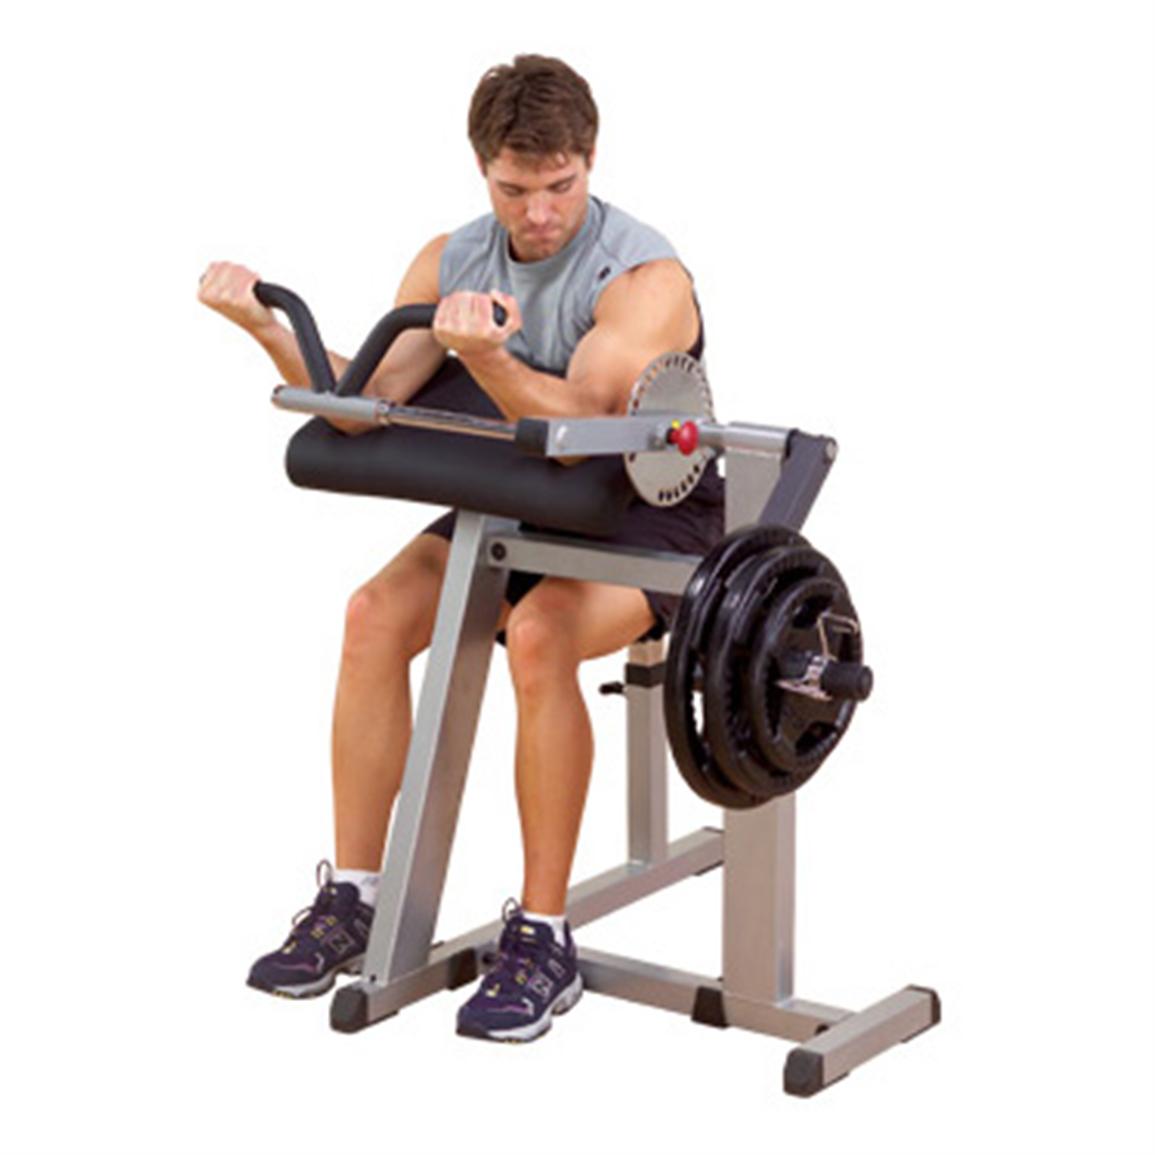 6 Day Biceps and triceps workout machines with Comfort Workout Clothes